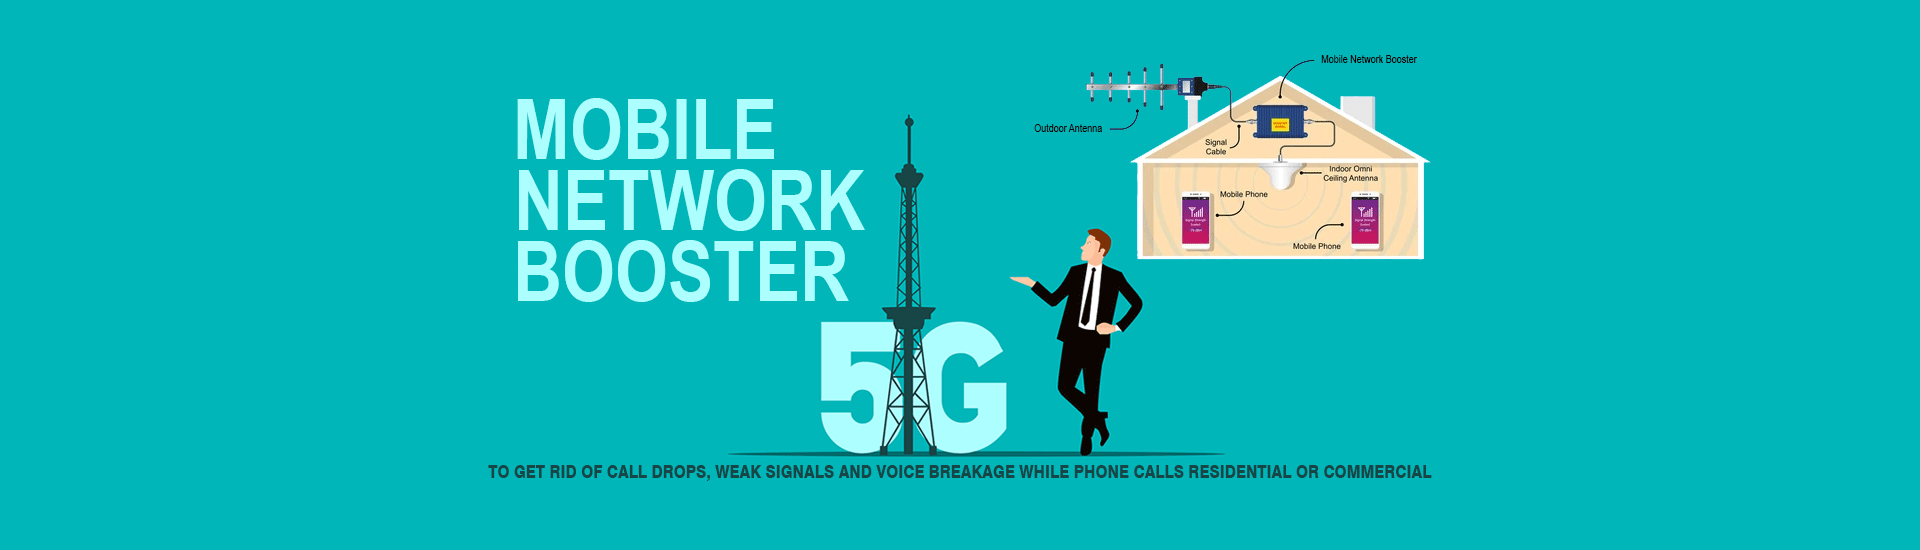 Mobile Network Booster in Mumbai